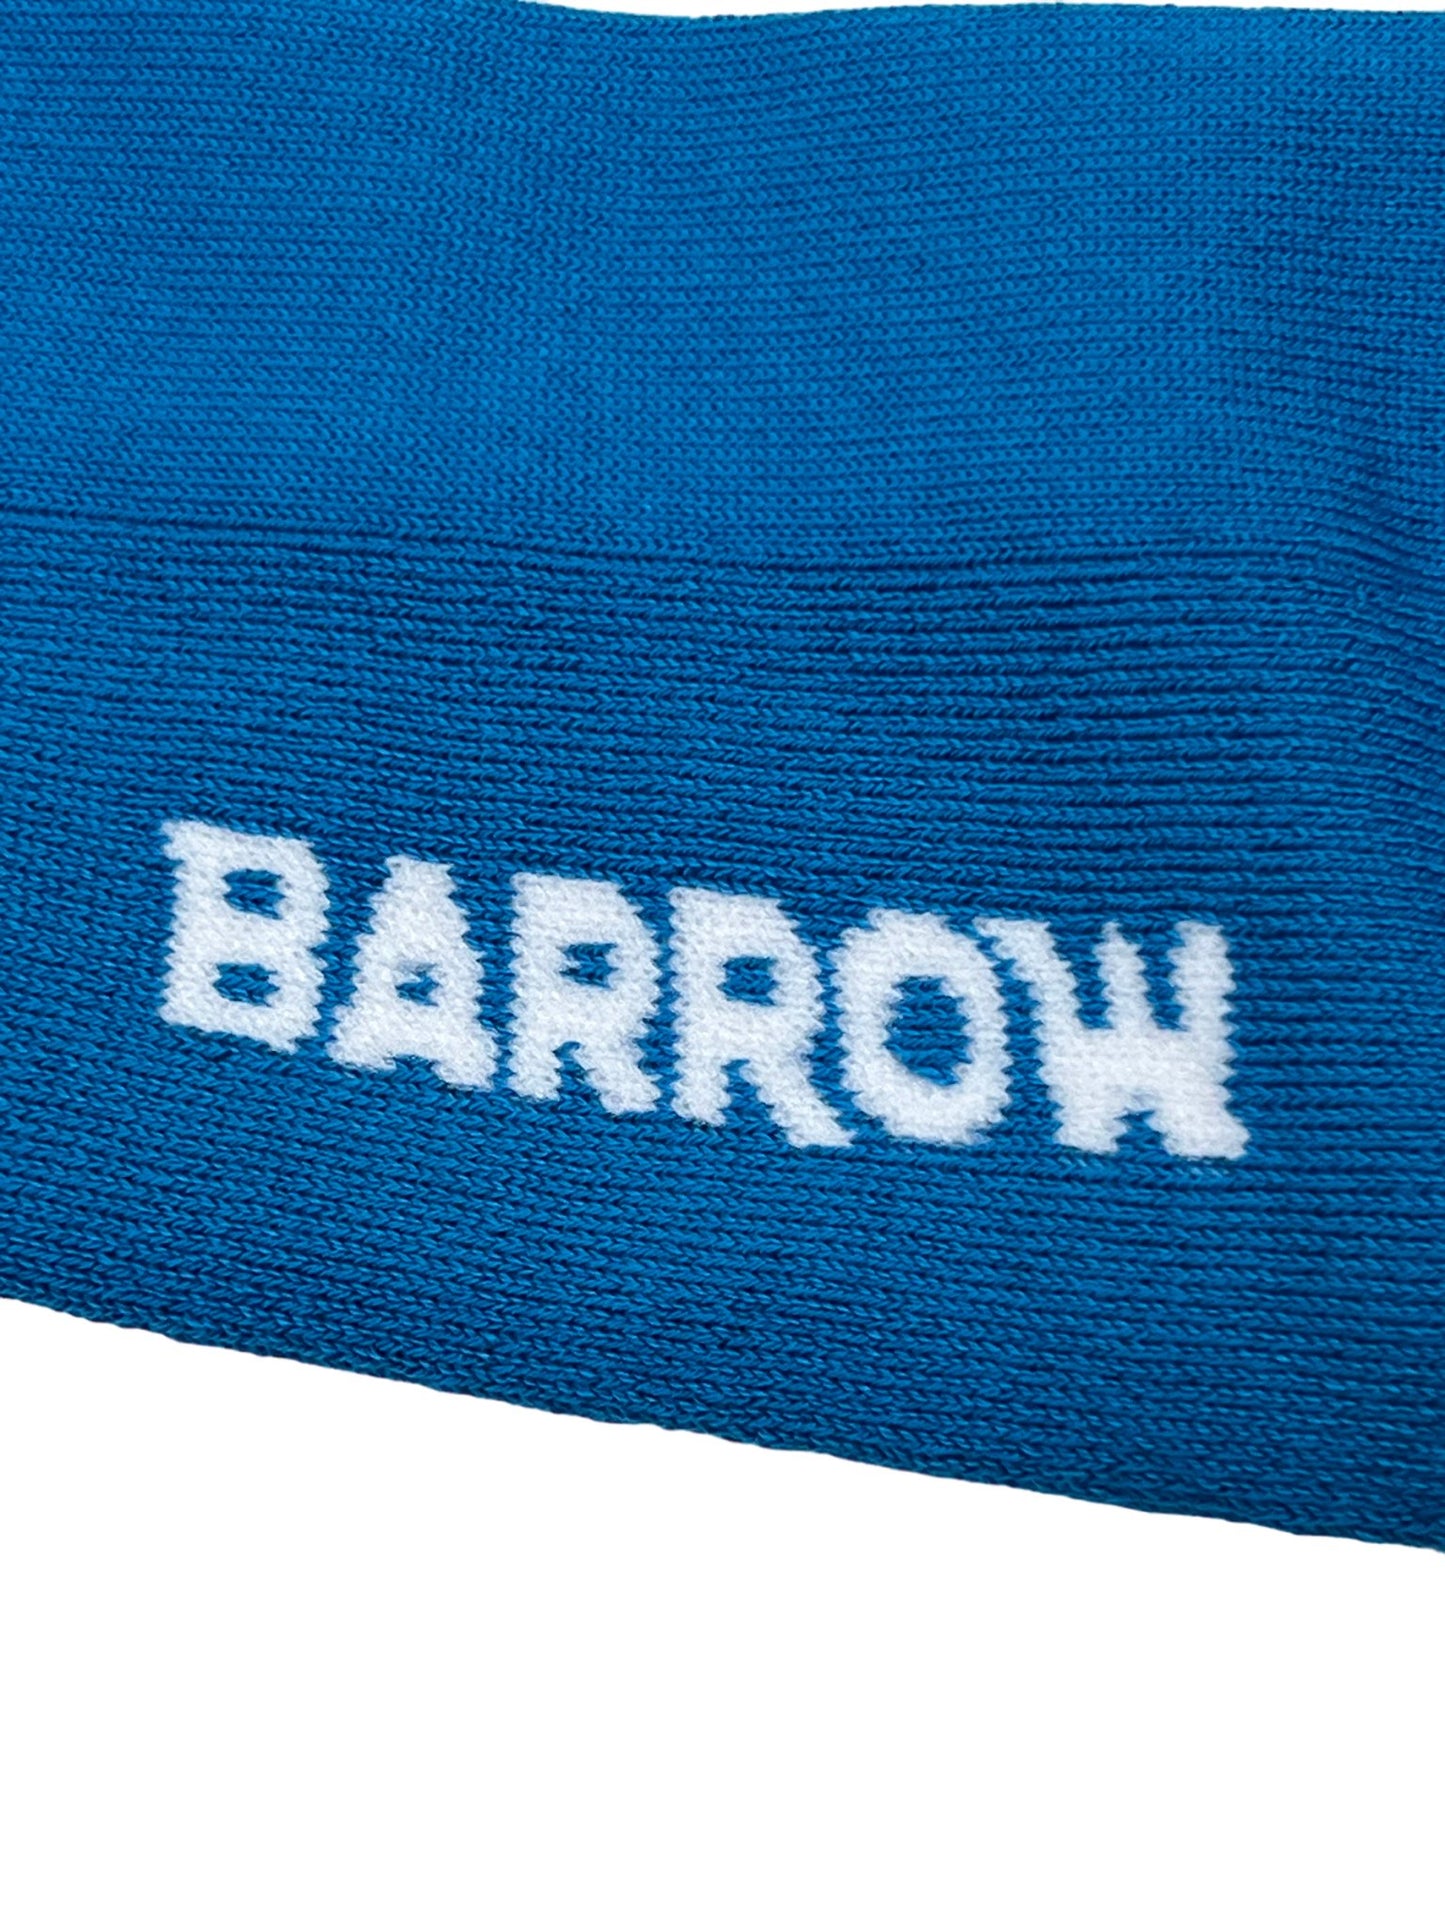 Close-up of a blue fabric with the word "BARROW" knitted in white thread, designed as part of our BARROW S4BWUASO140 SOCKS UNISEX collection.